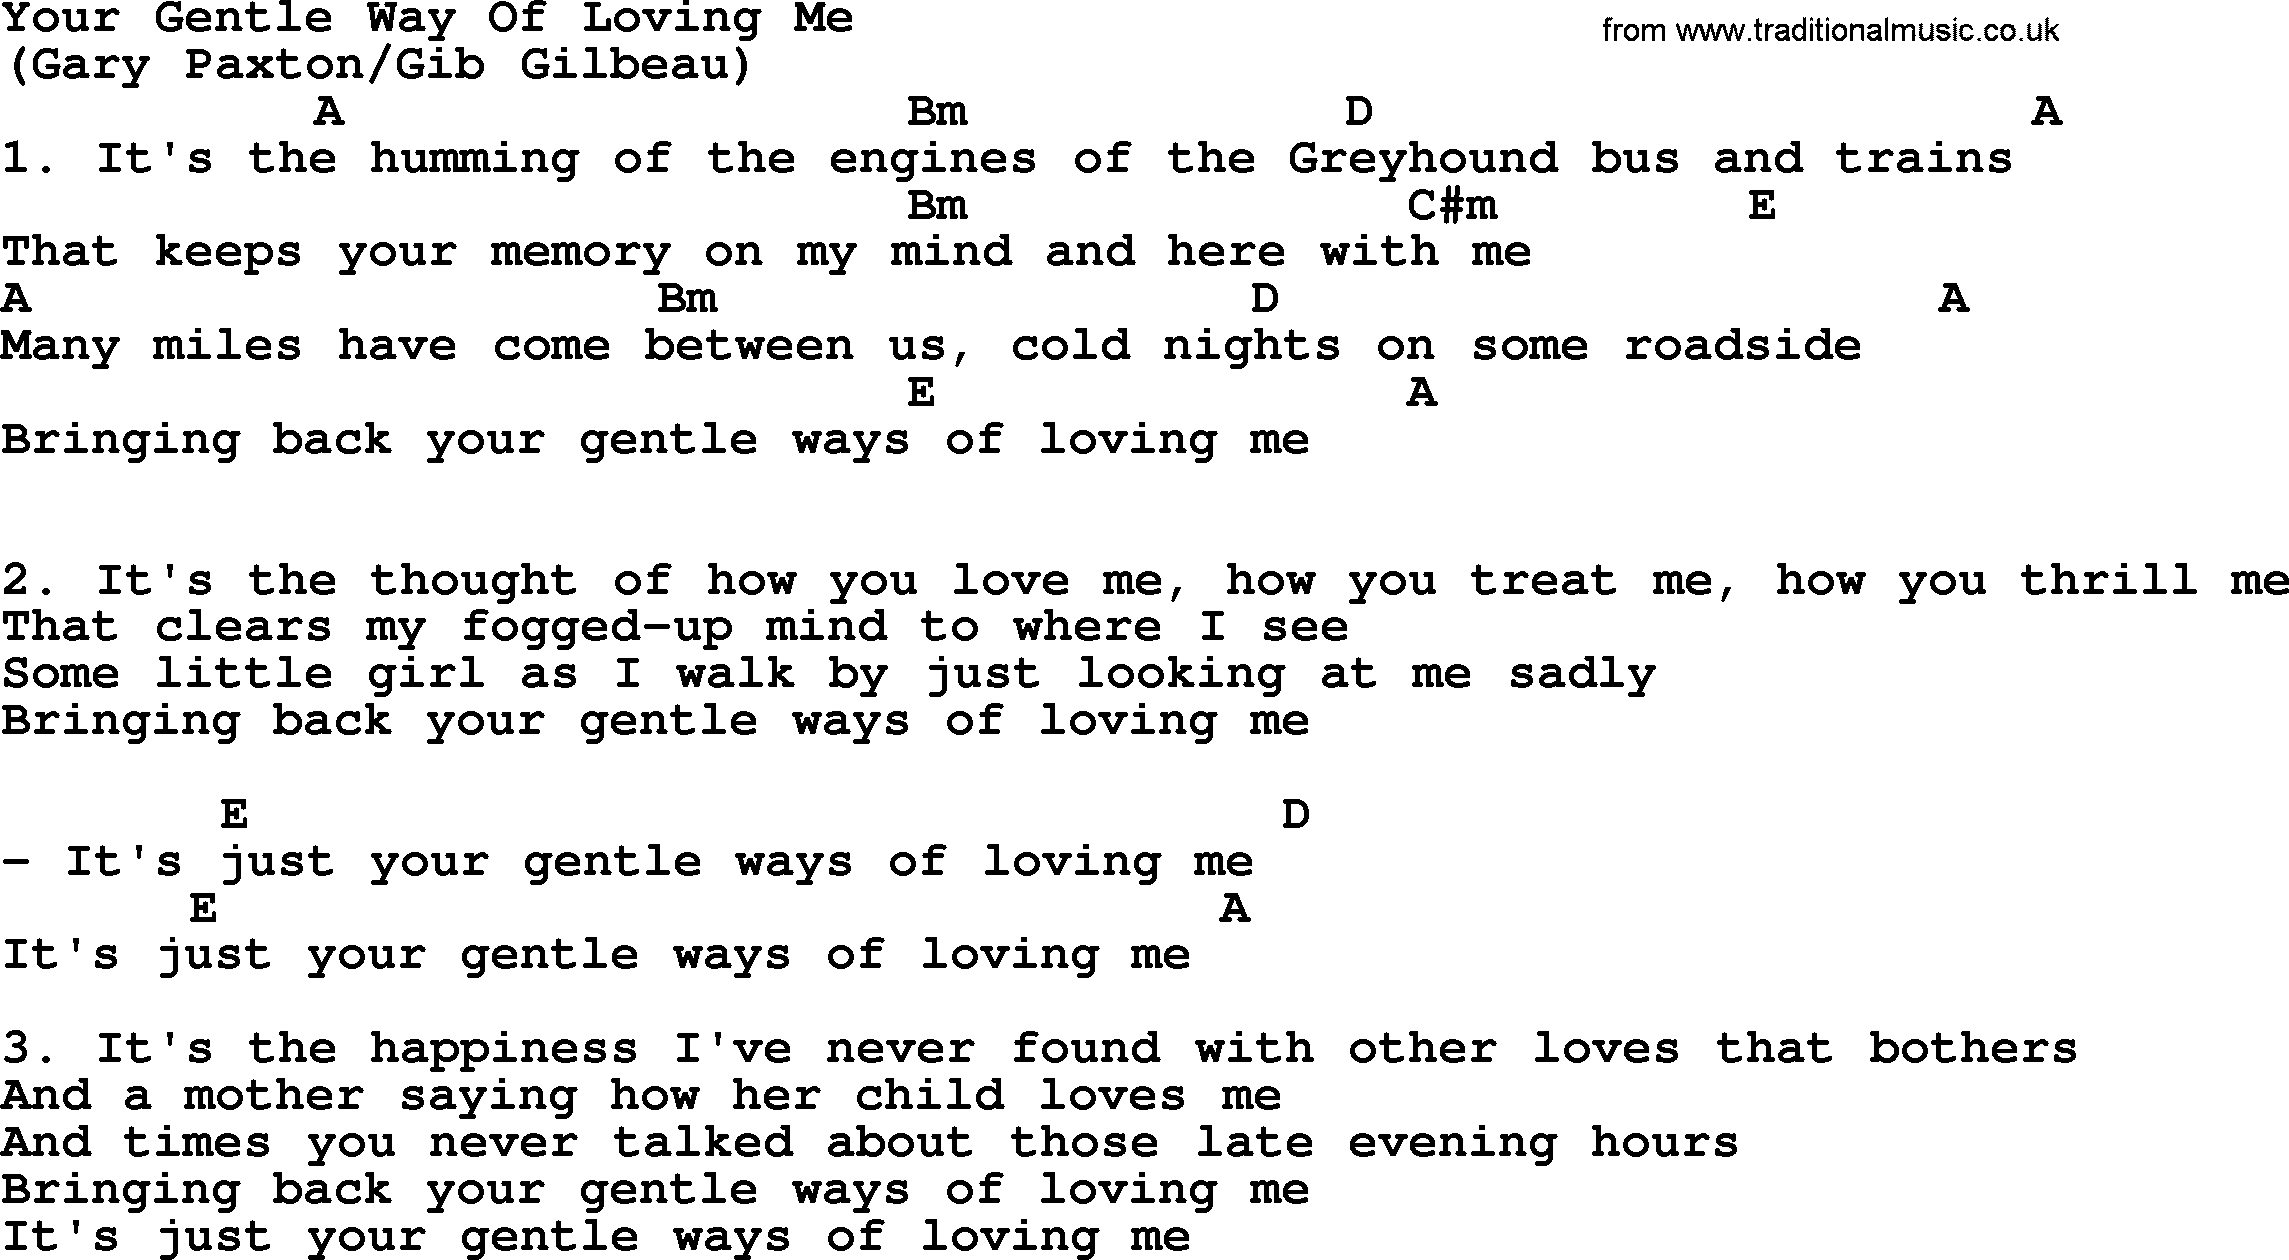 The Byrds song Your Gentle Way Of Loving Me, lyrics and chords